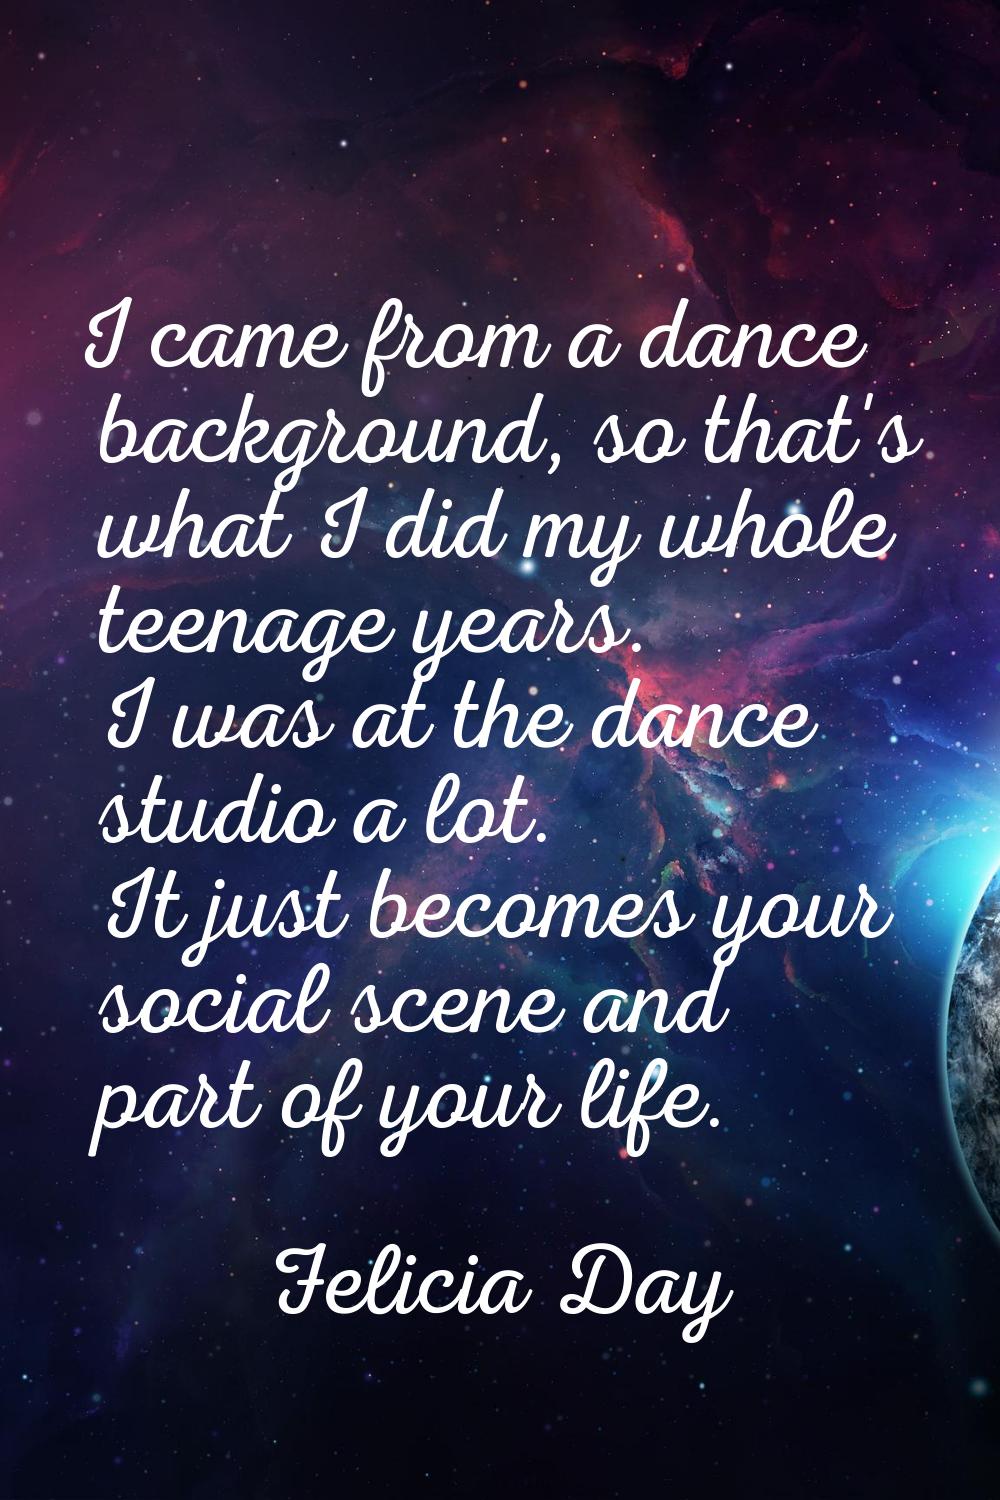 I came from a dance background, so that's what I did my whole teenage years. I was at the dance stu